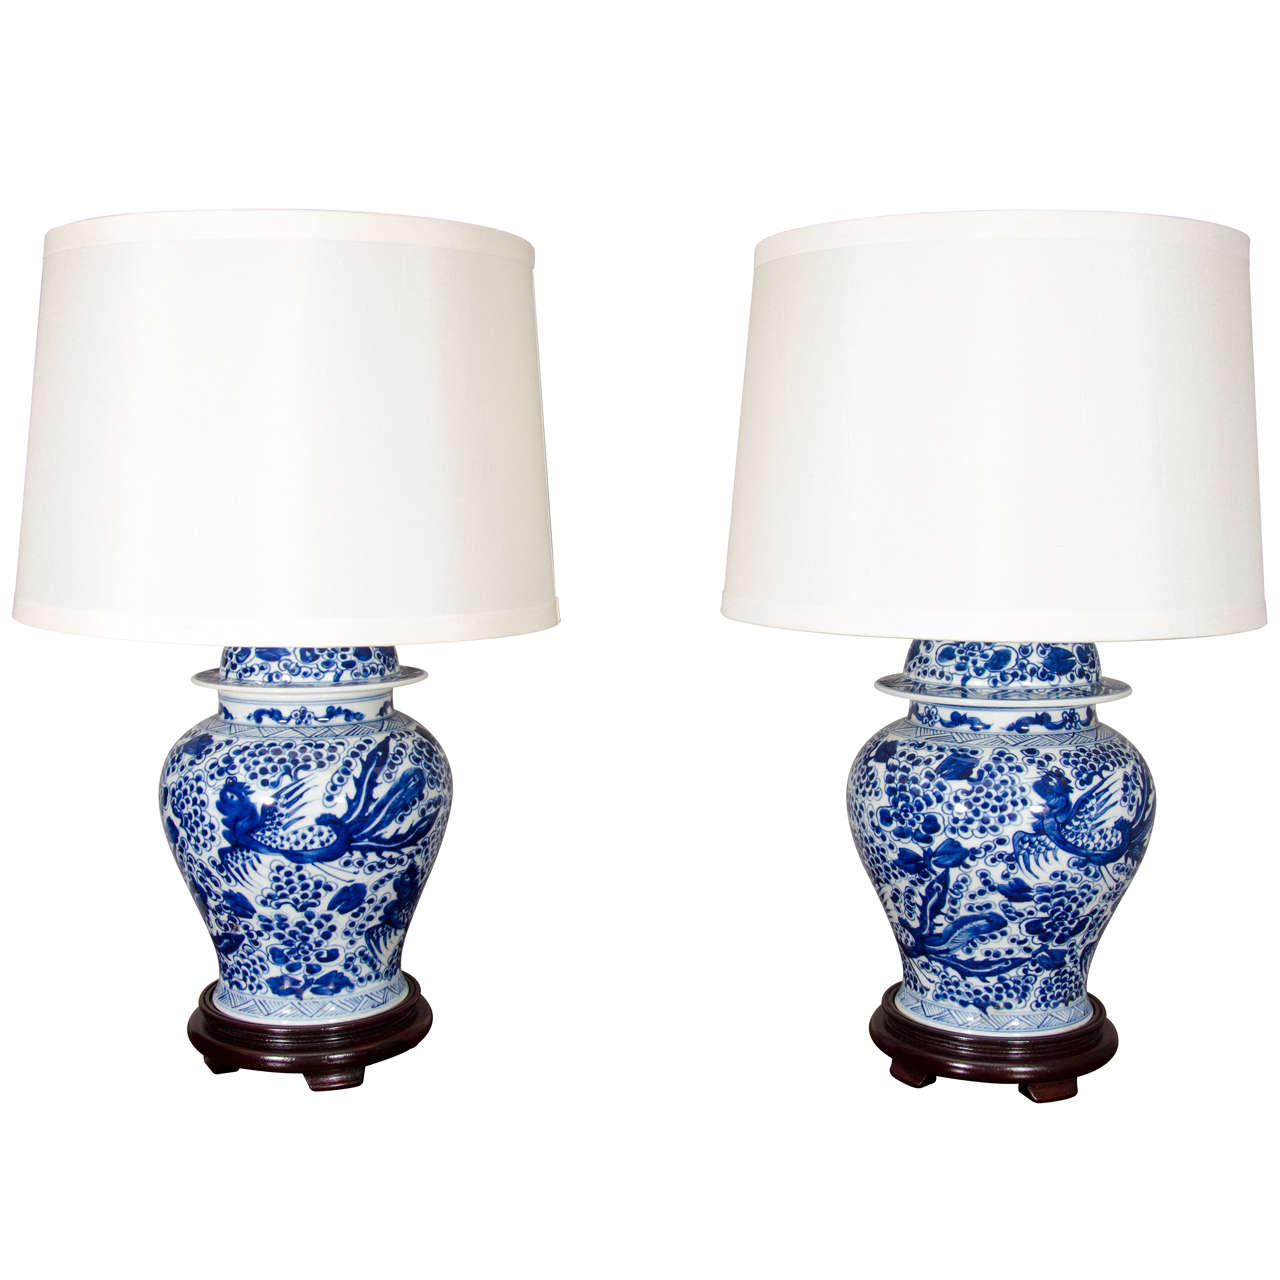 Pair of Blue and White Chinese Temple Jar Lamps